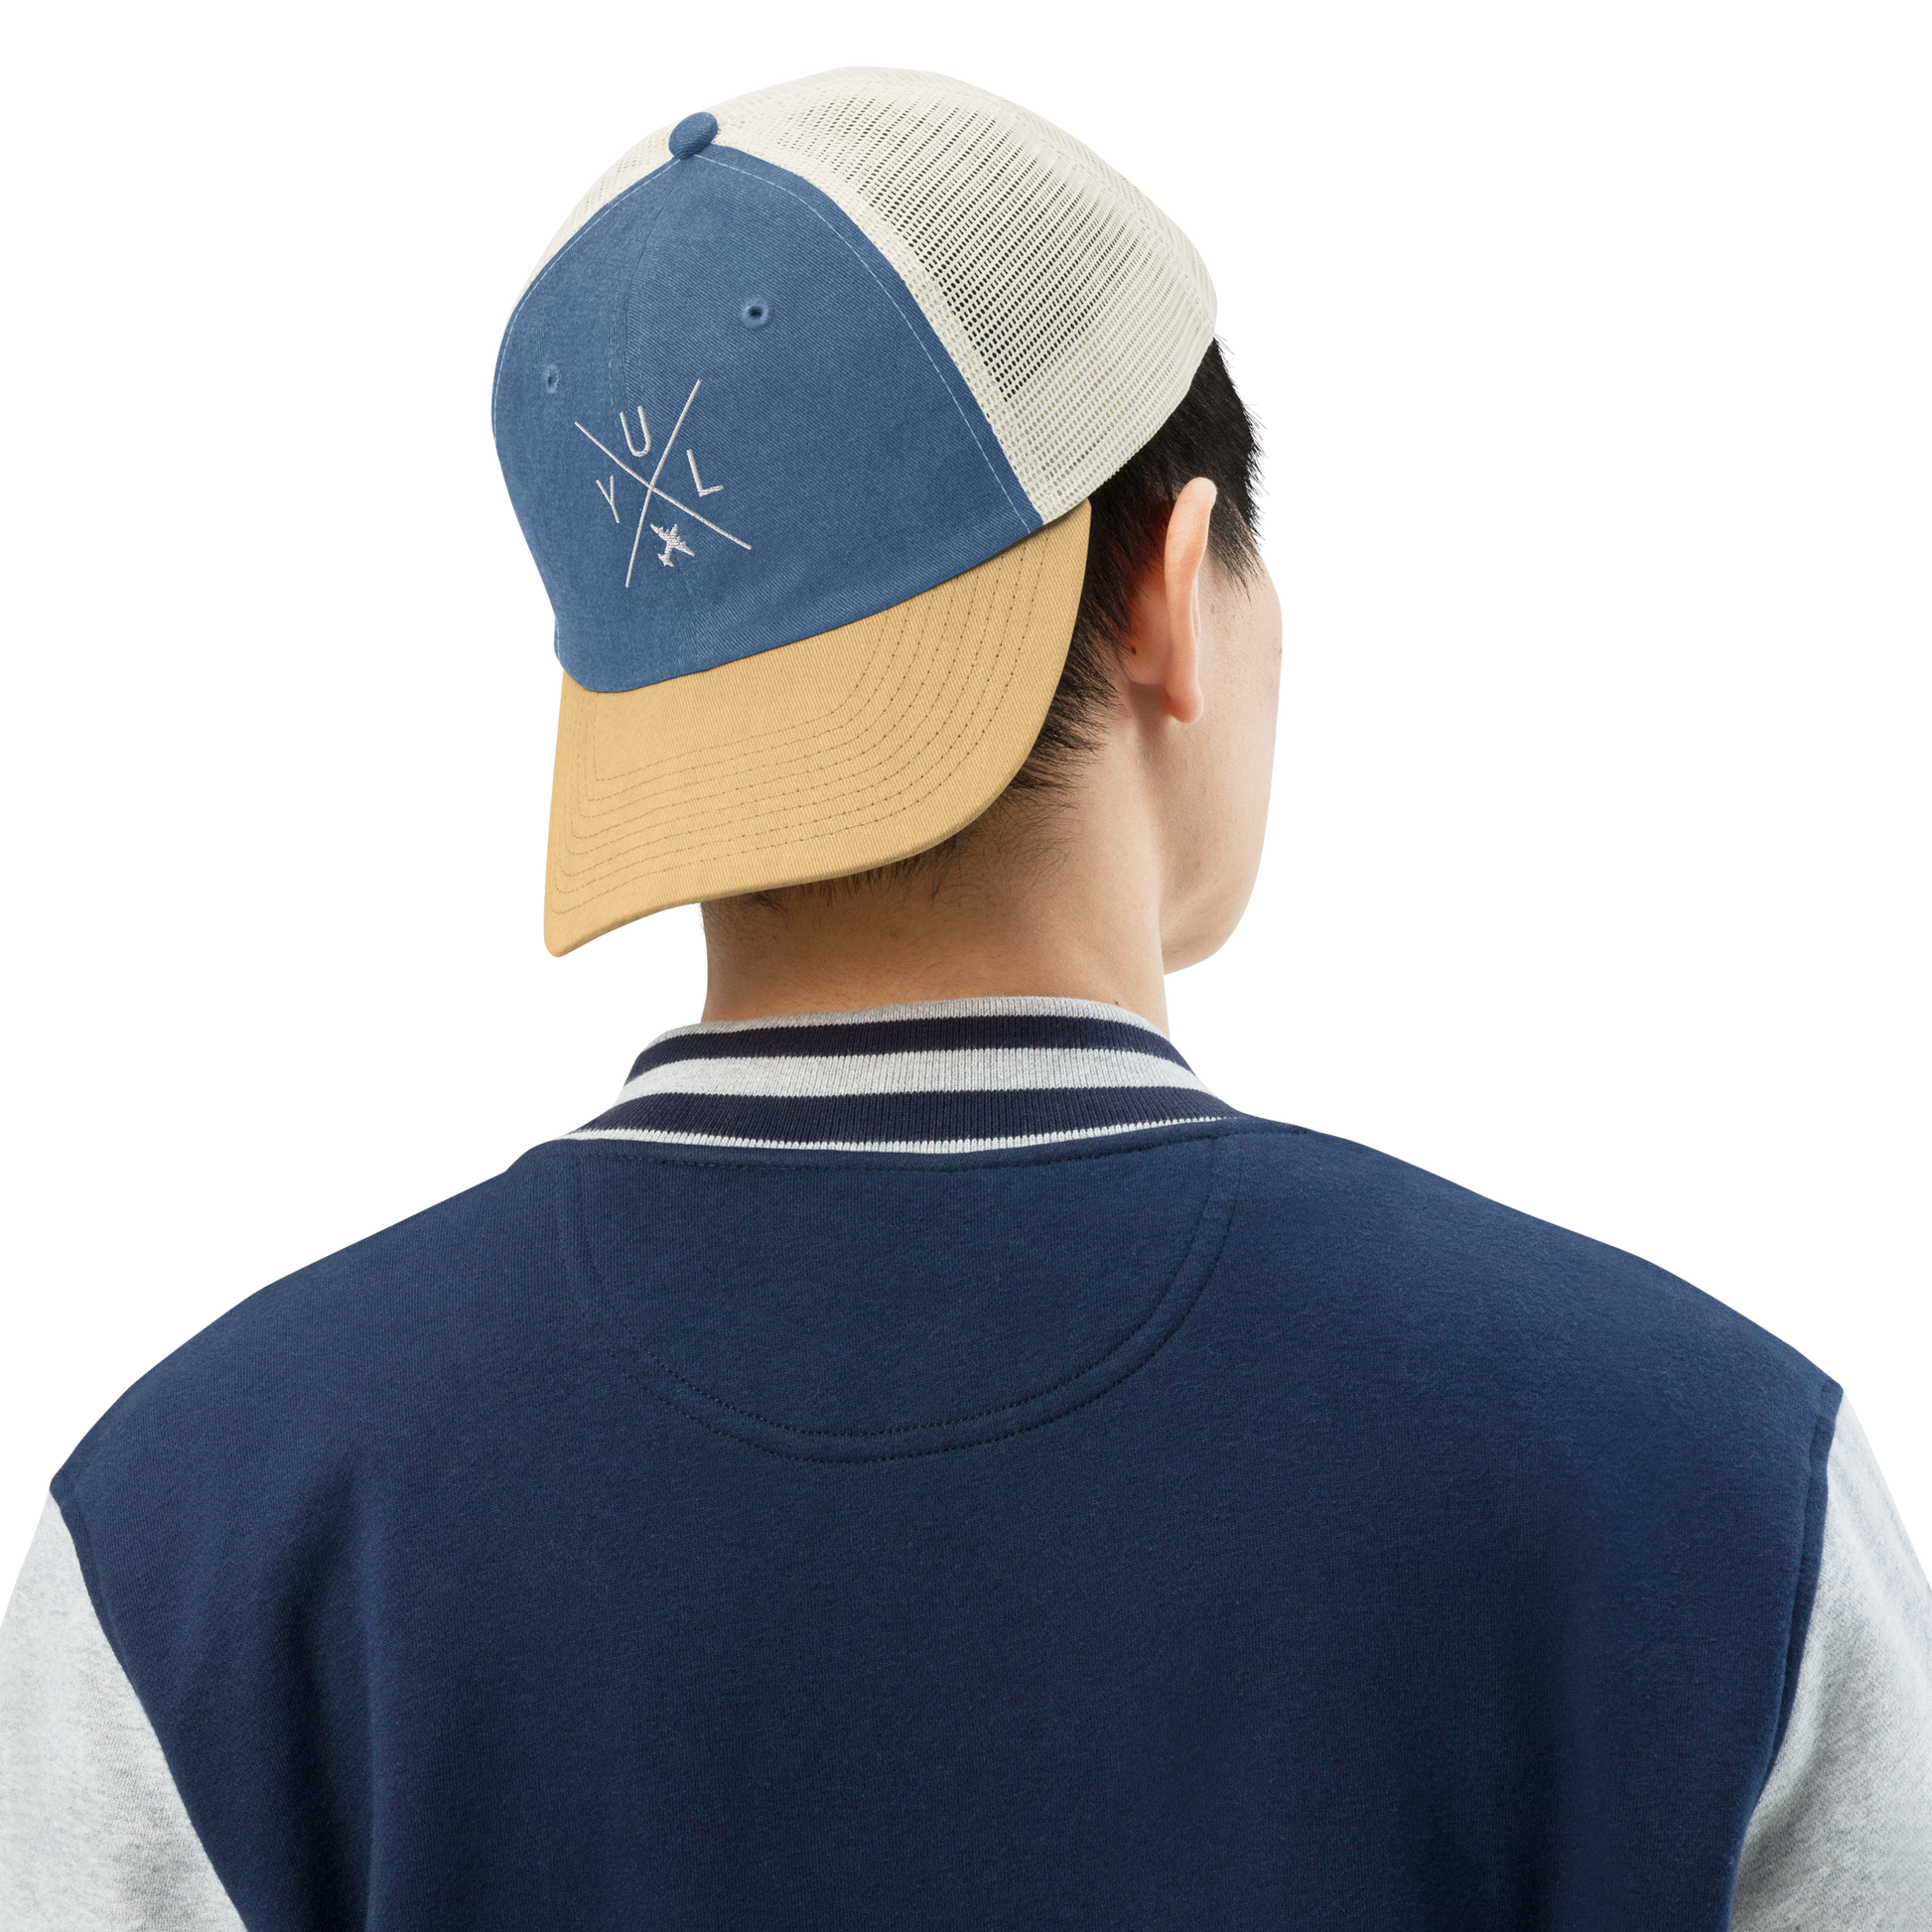 YHM Designs - YUL Montreal Pigment-Dyed Trucker Cap - Crossed-X Design with Airport Code and Vintage Propliner - White Embroidery - Image 04